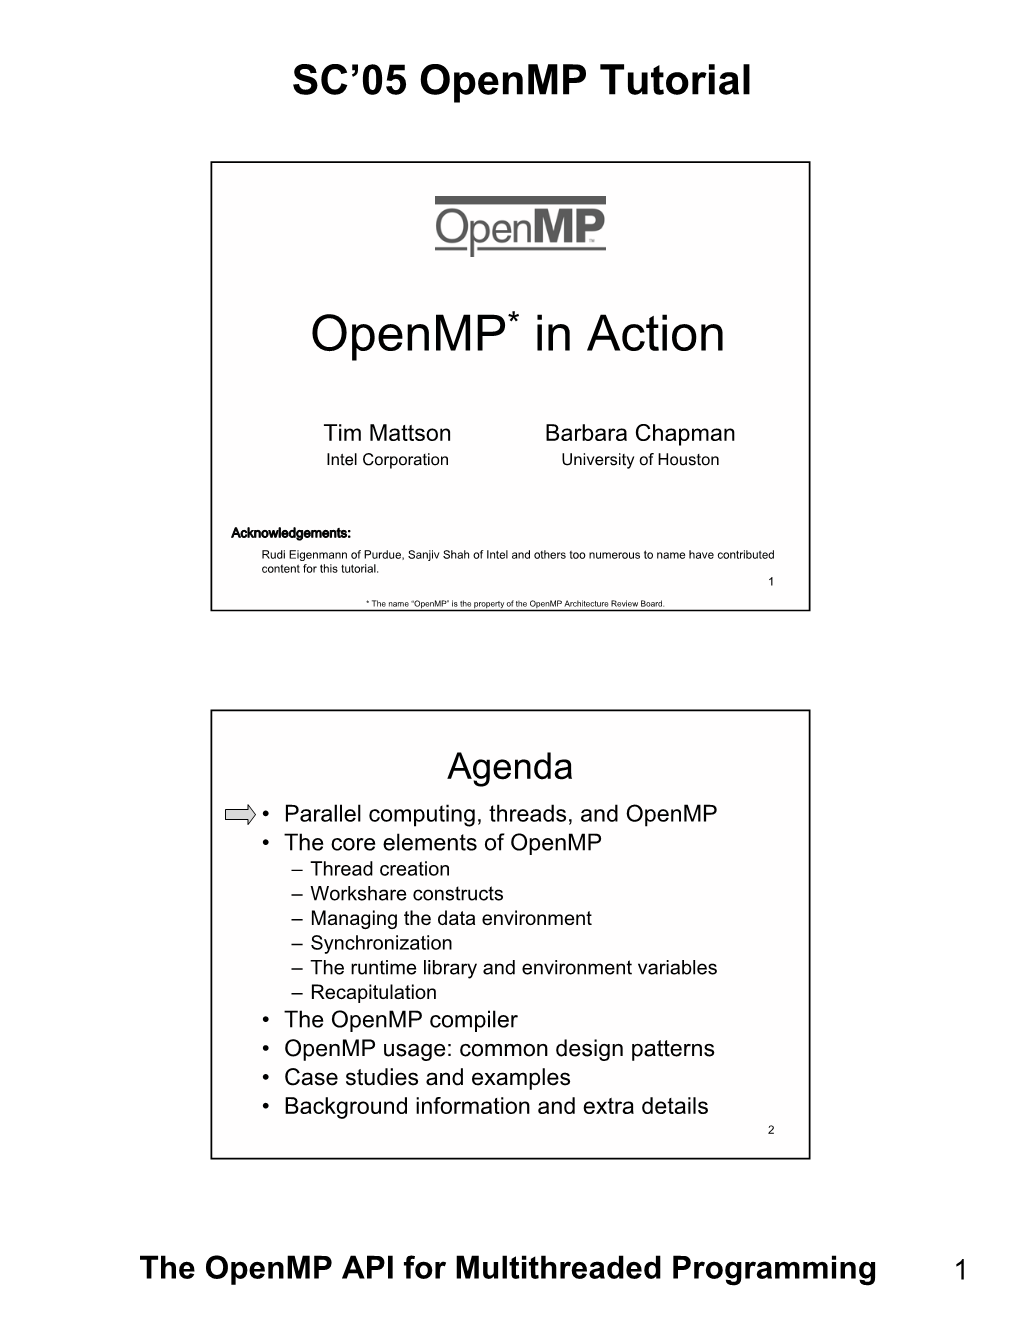 Openmp* in Action